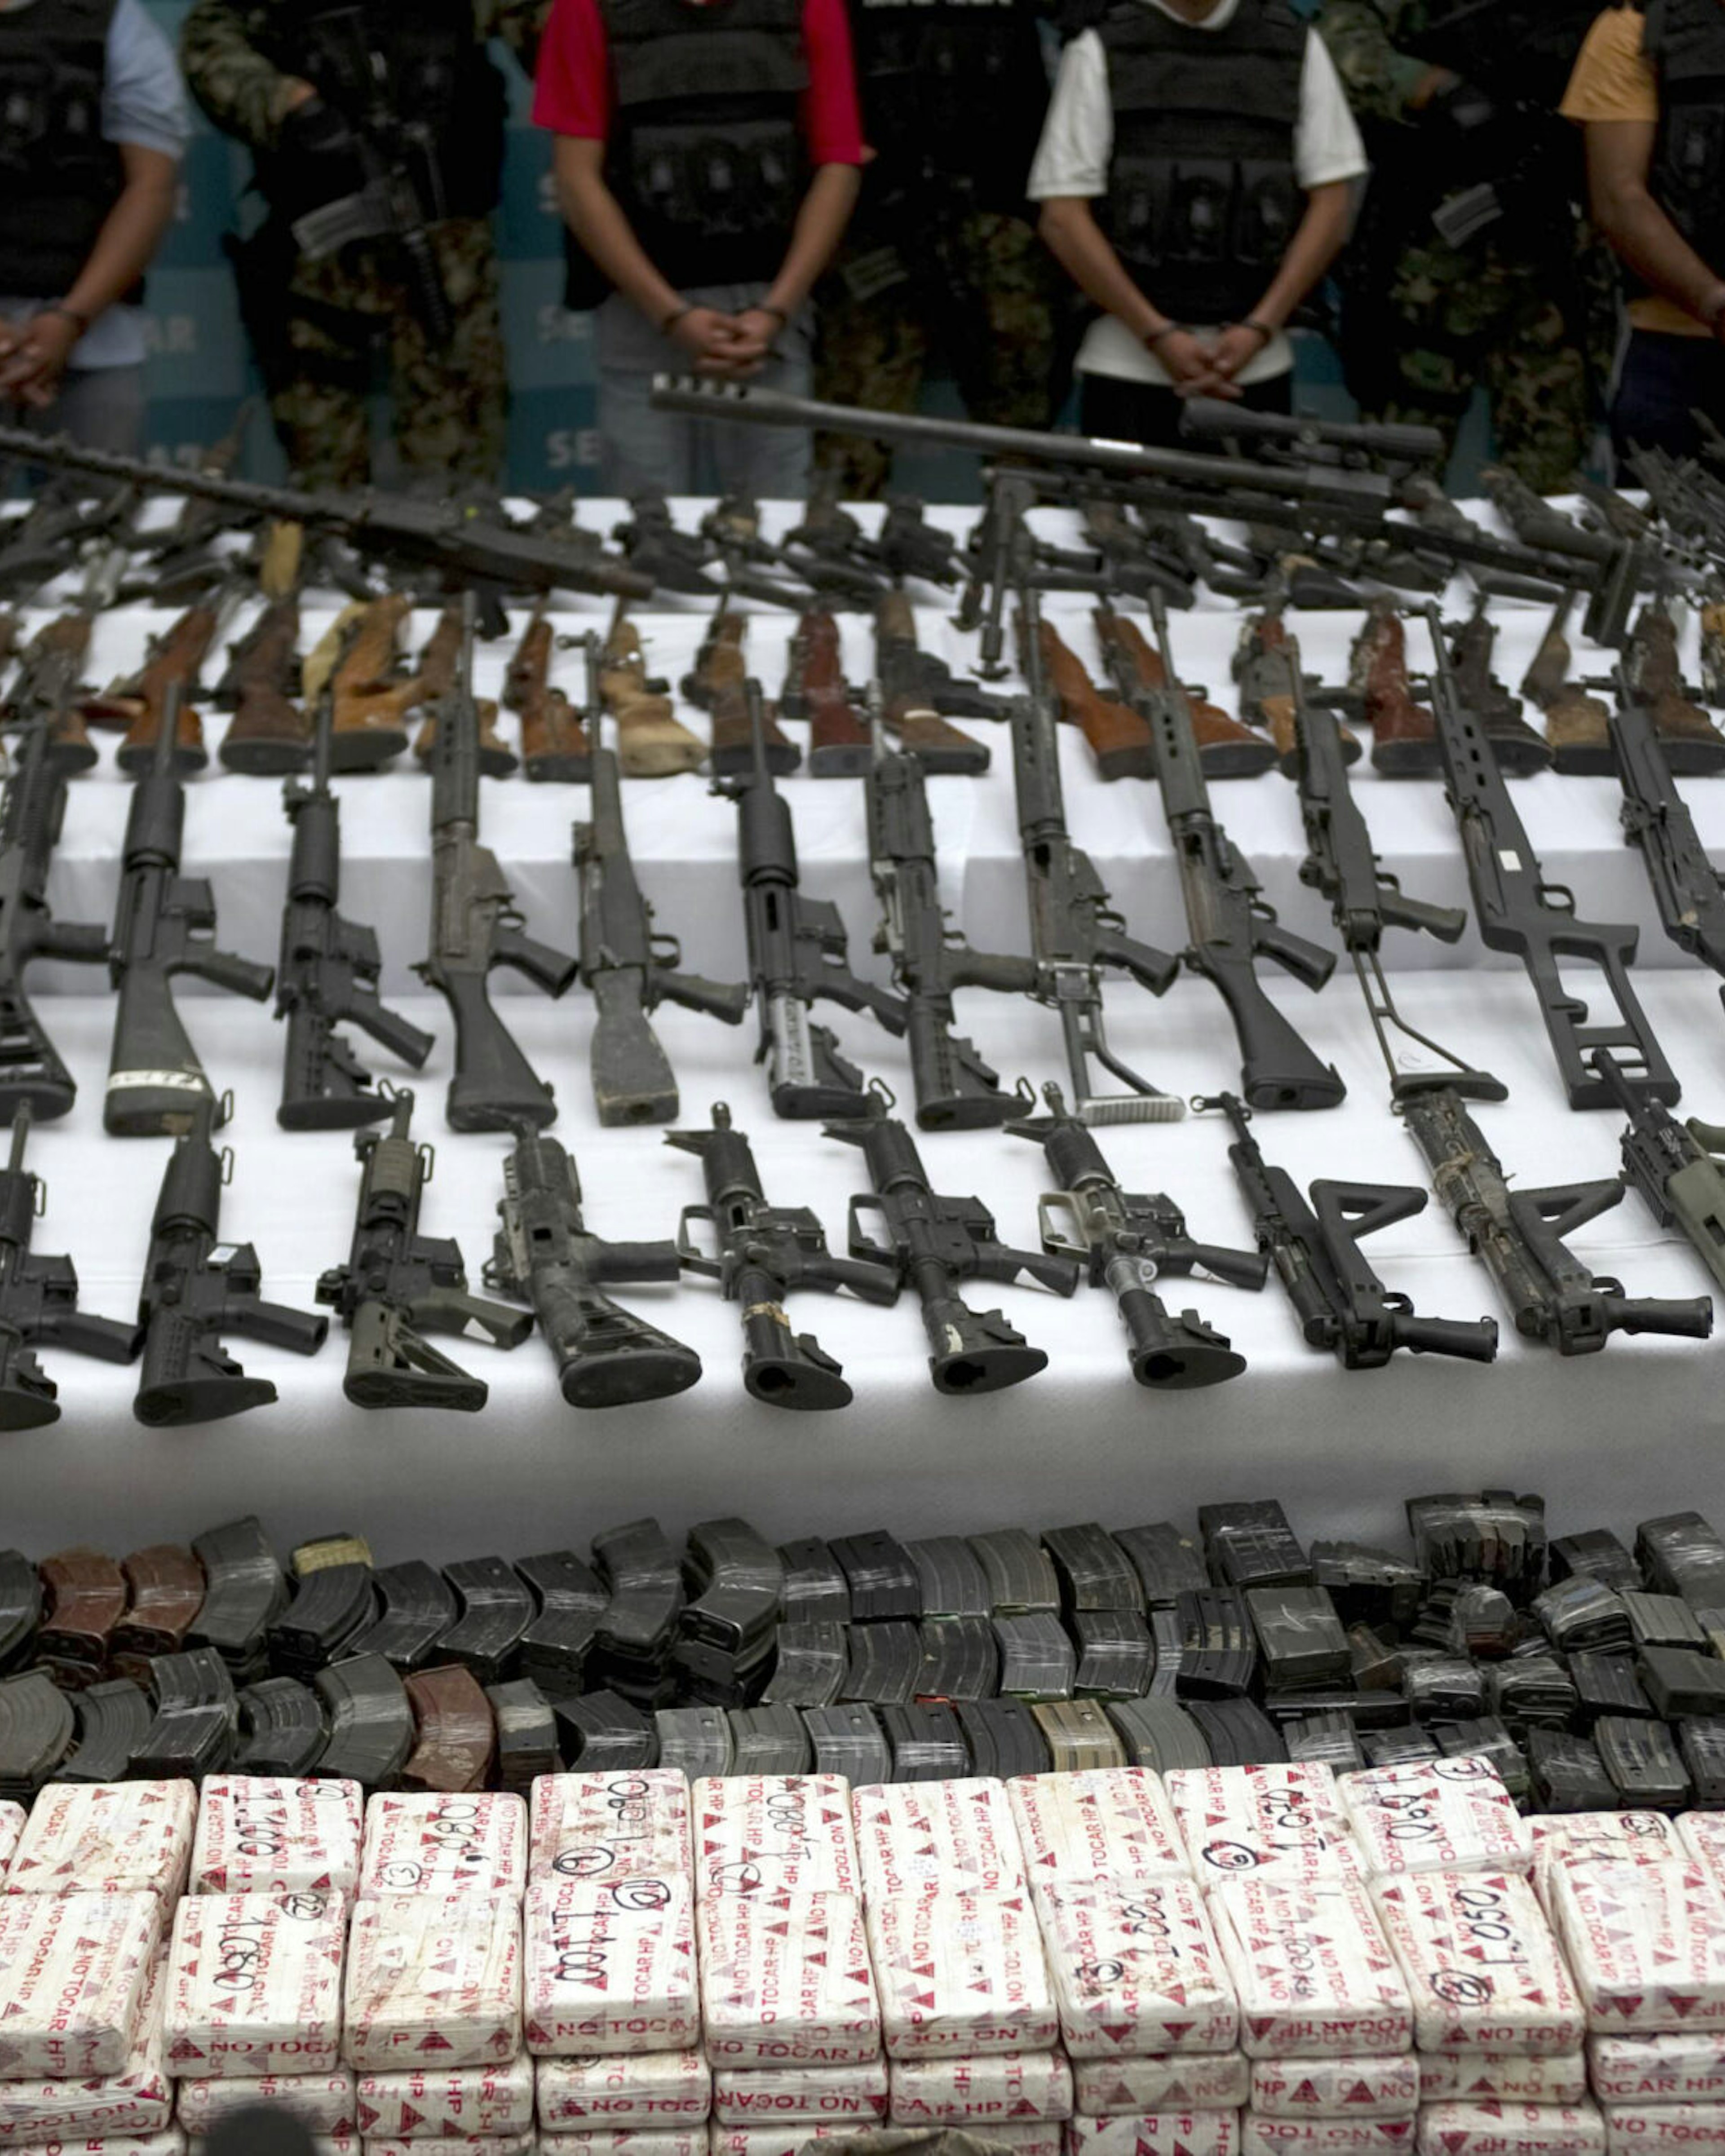 Mexican marines escort five alleged drug traffickers of the Zetas drug cartel in front of hand grenades, firearms, cocaine and military uniforms seized to alleged members of the Zetas drug traffickers cartel and presented to press on June 9, 2011 at the Navy Secretaryship in Mexico City. Fiven men were arrested and more than two hundred rifles, eleven pistols, military uniforms, differents caliber ammunitions and more than 200 kg of cocaine were seized in the Coahuila and Nuevo Leon States by the Navy. AFP PHOTO/ Yuri CORTEZ (Photo credit should read YURI CORTEZ/AFP via Getty Images)